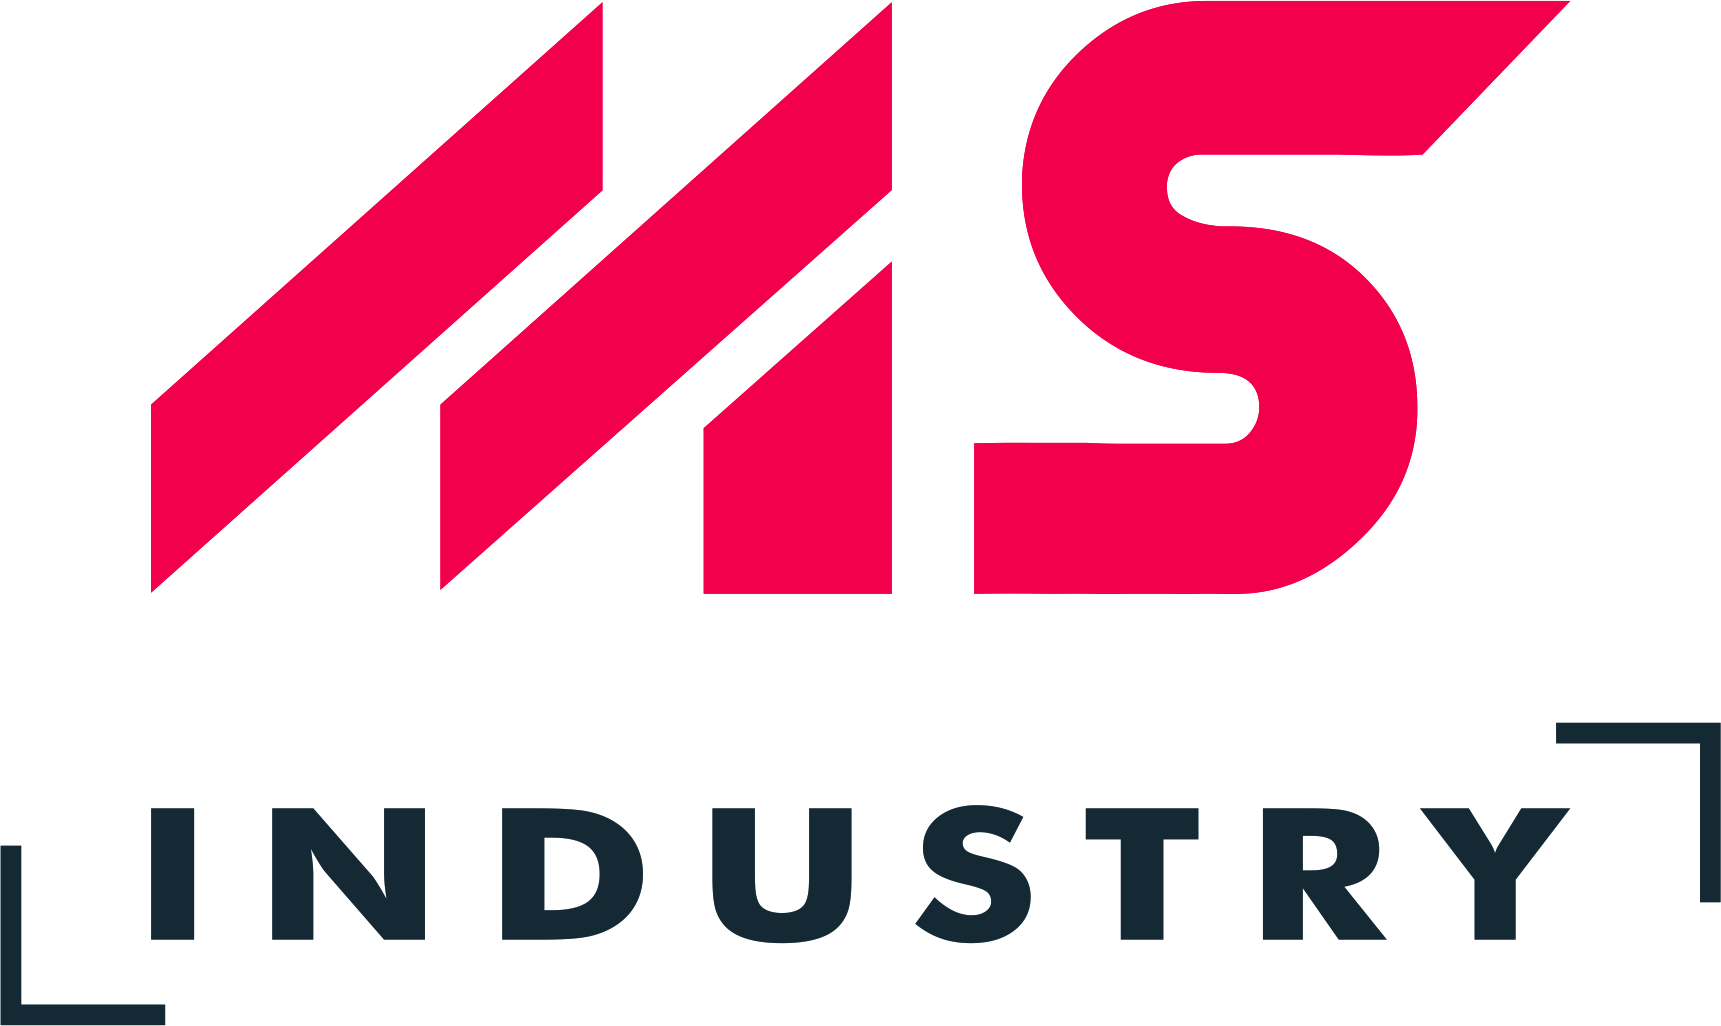 MS INDUSTRY